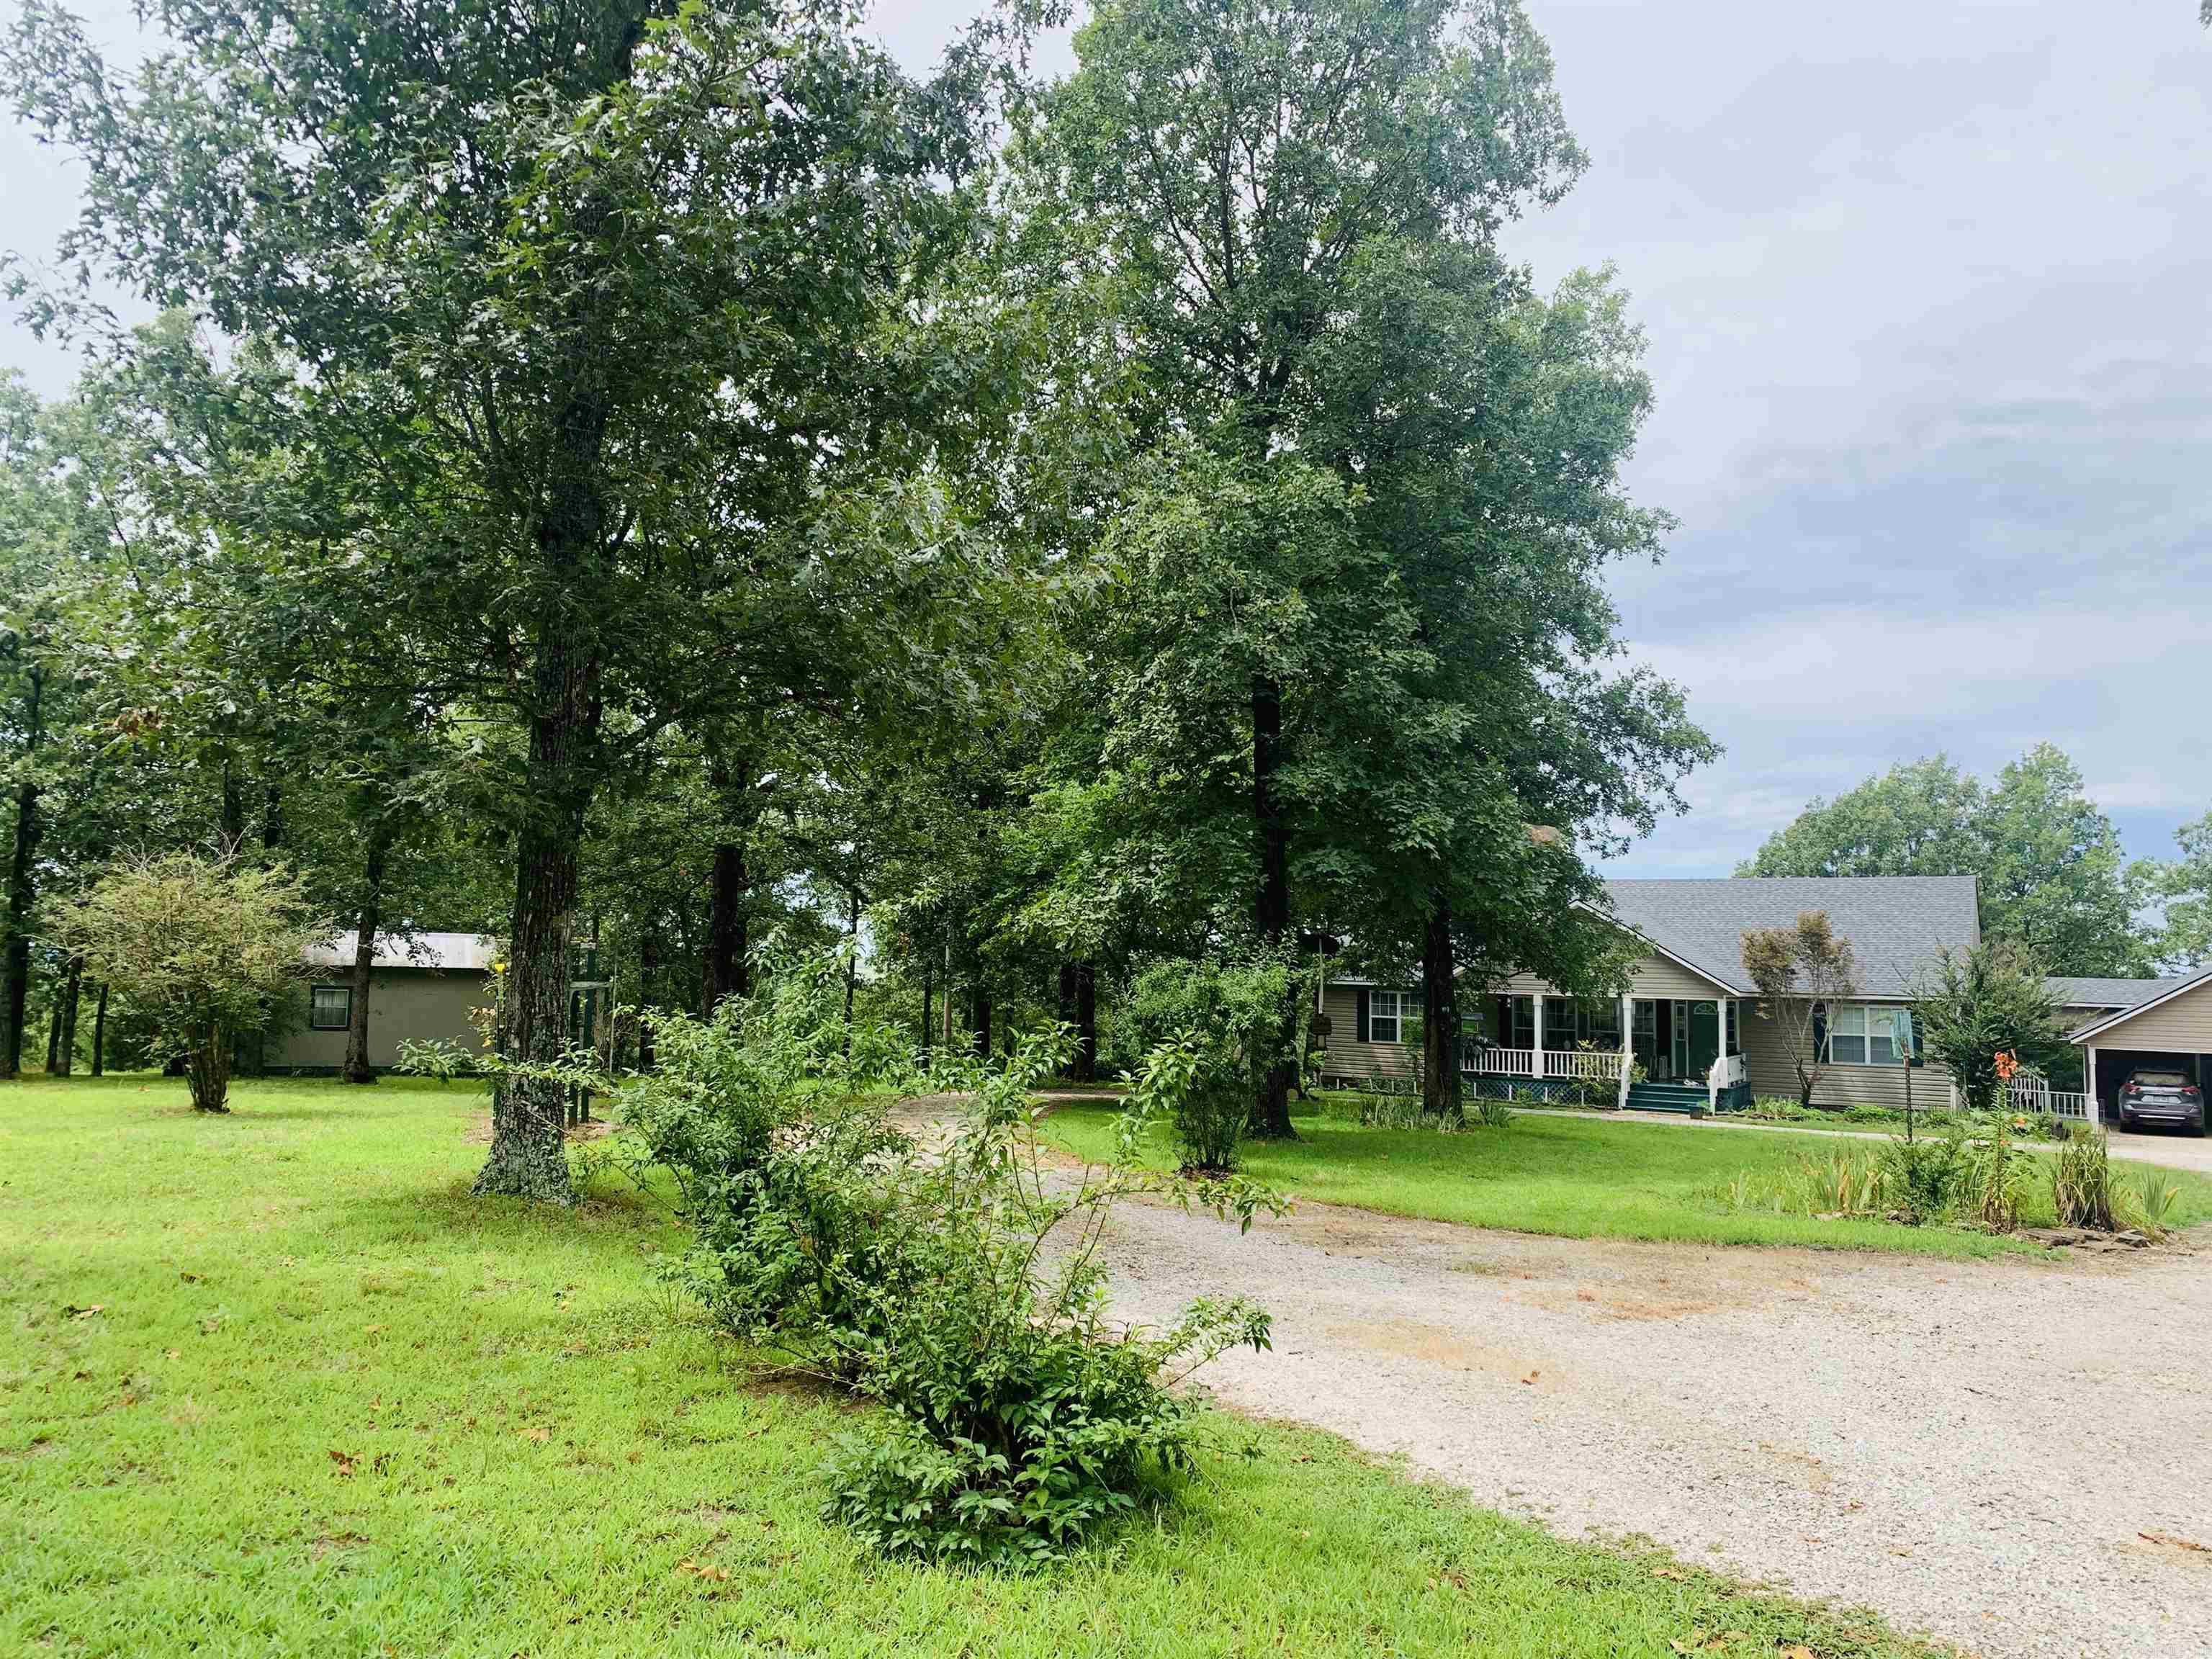 0 Pitcher Hill Road, Mountain View, AR 72560